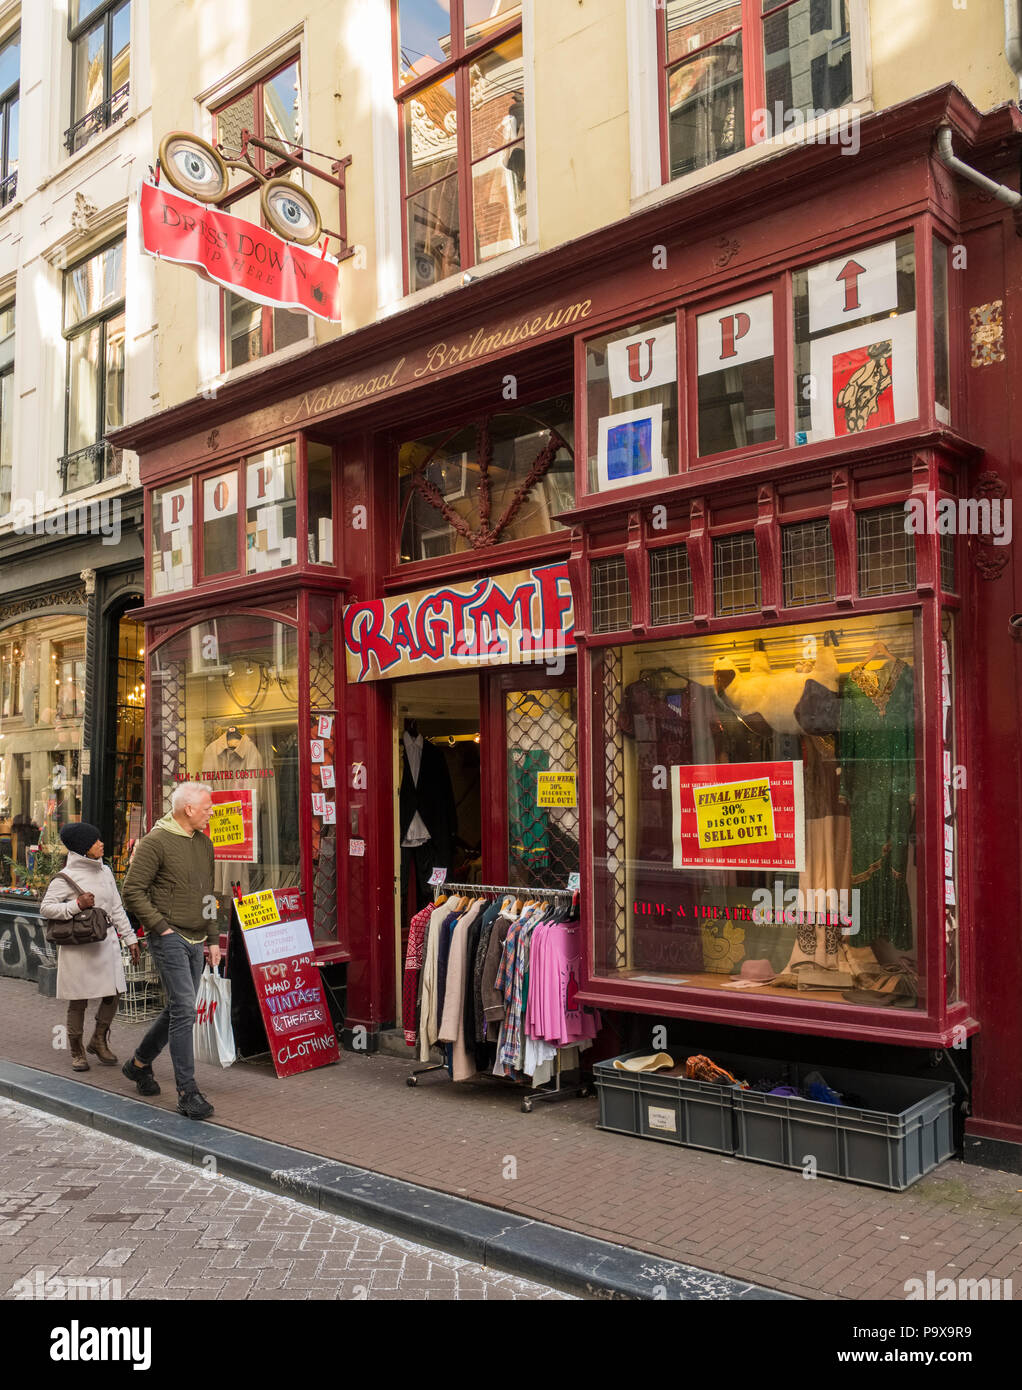 Ragtime, a vintage shop store in the trendy 9 Streets area Amsterdam, Netherlands, Holland, Europe Stock Photo